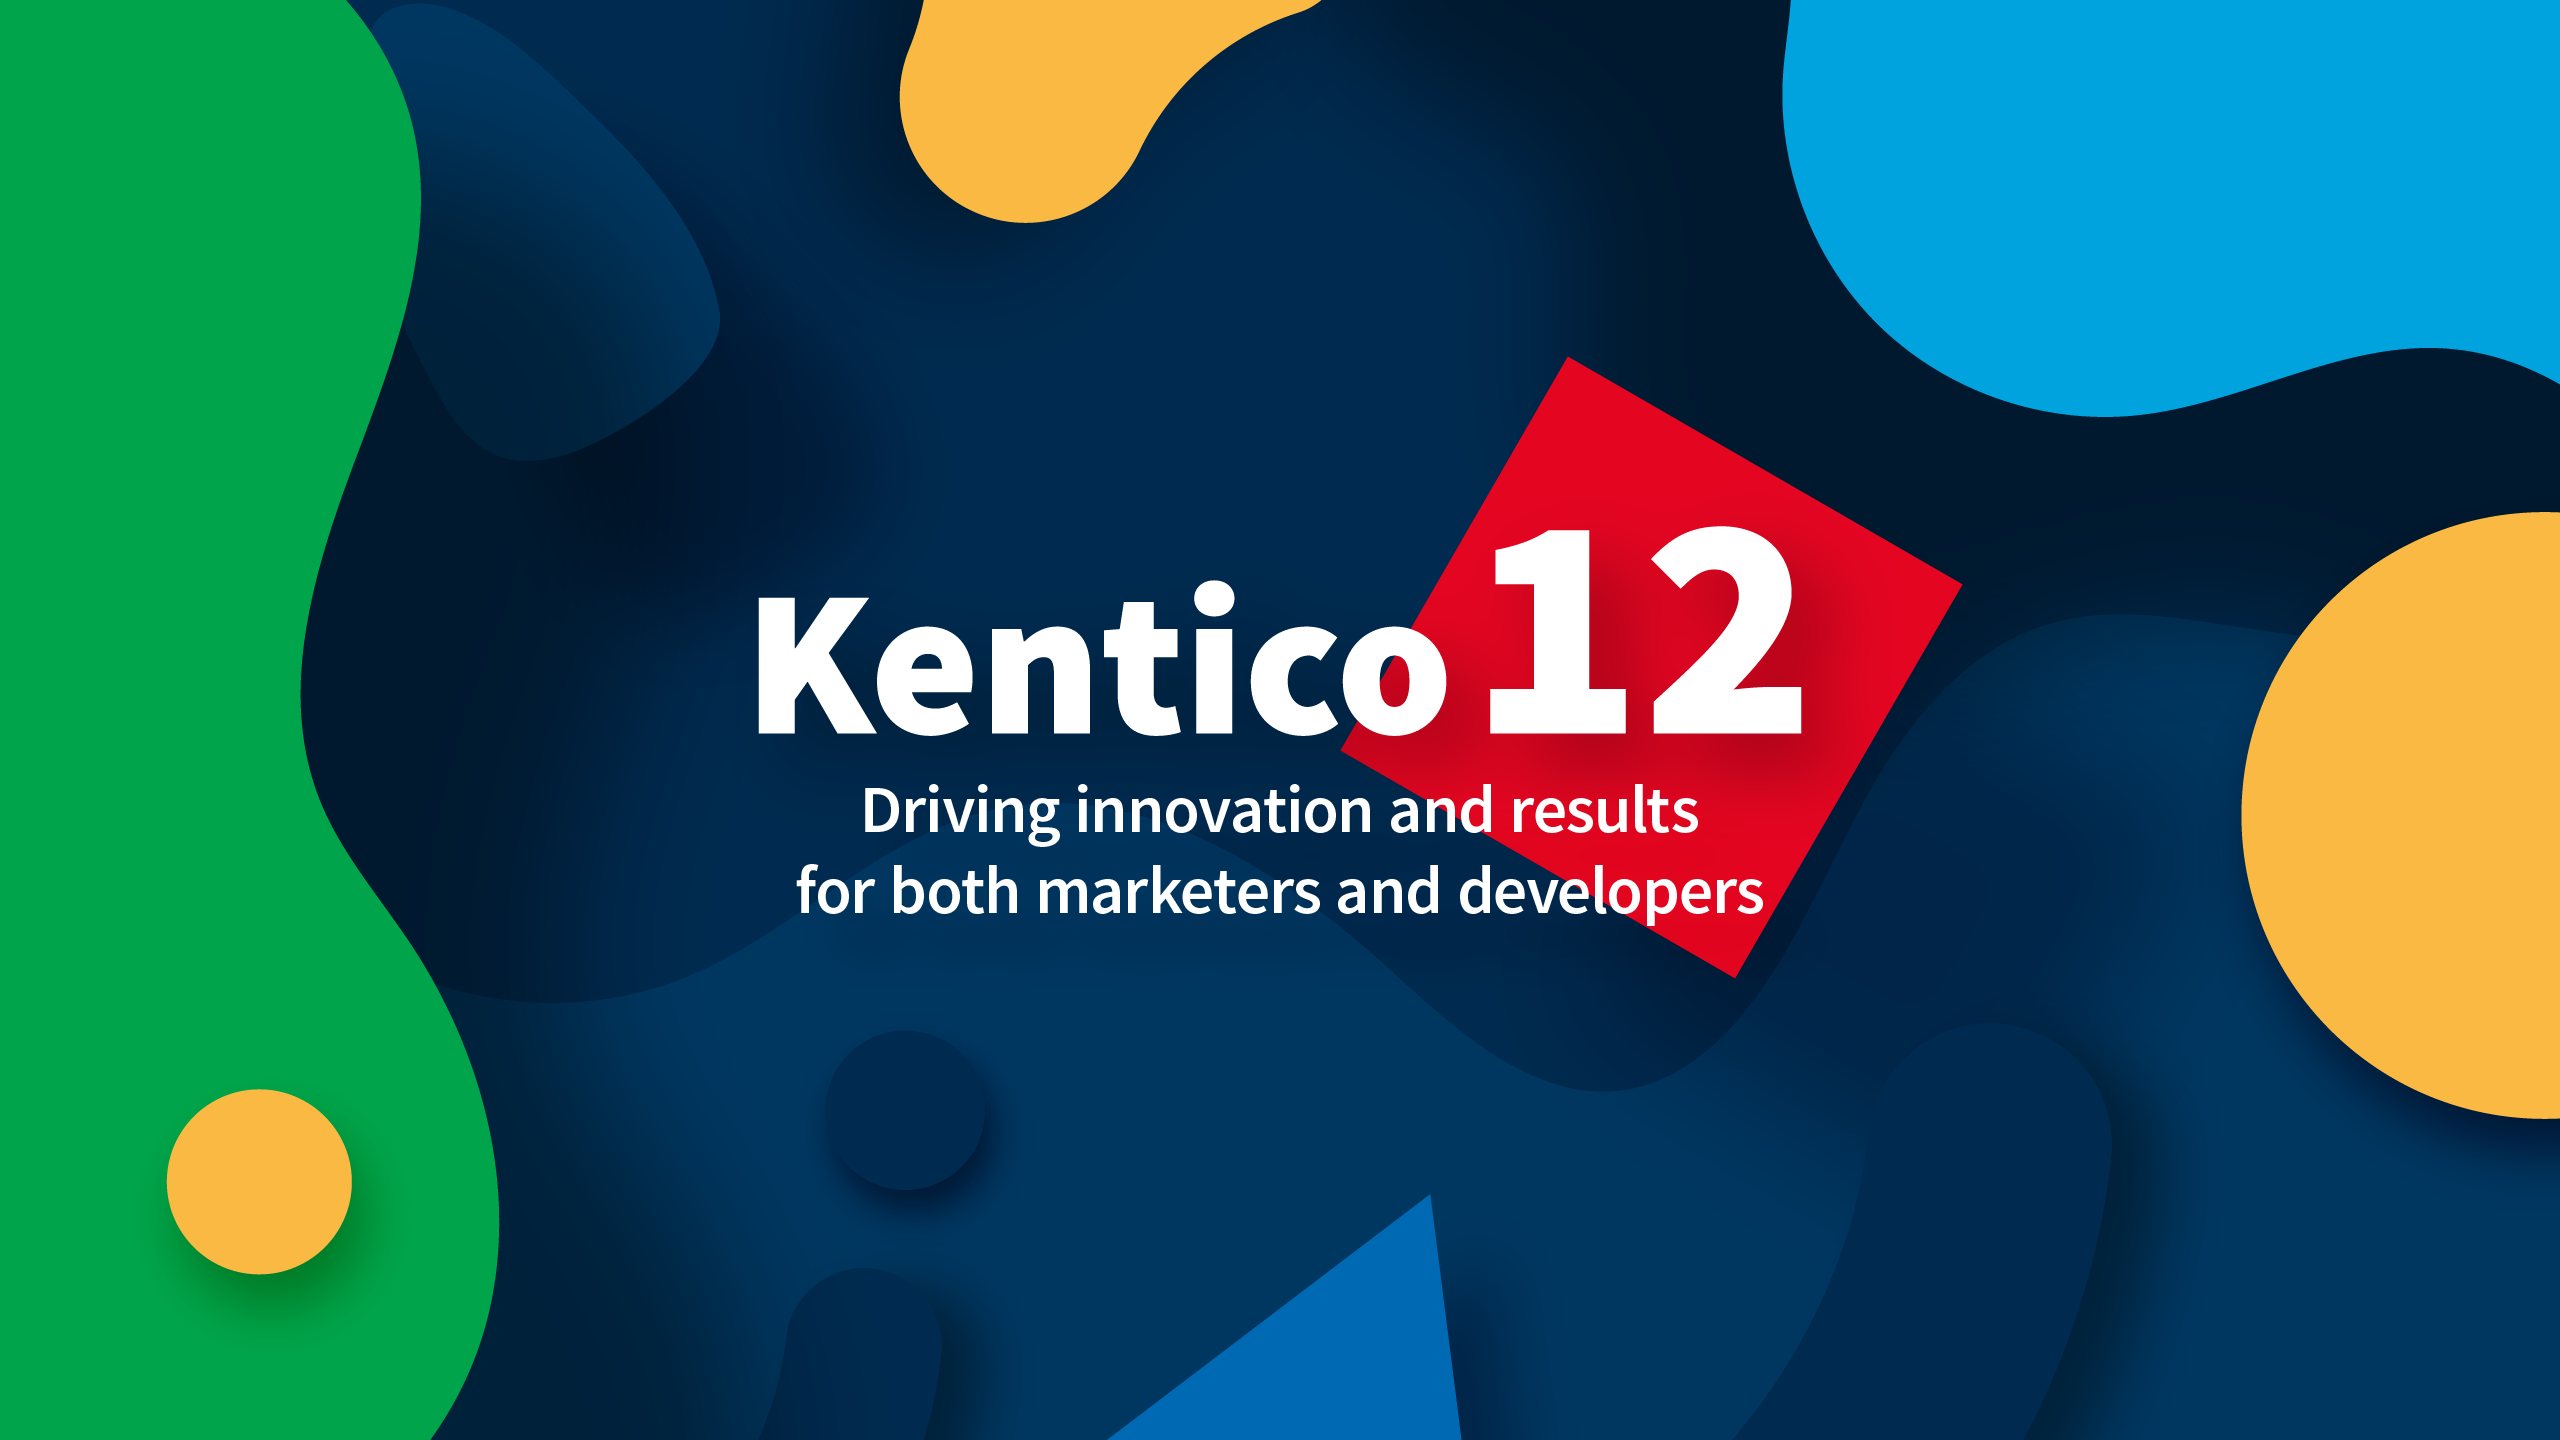 Kentico 12 Has Arrived!